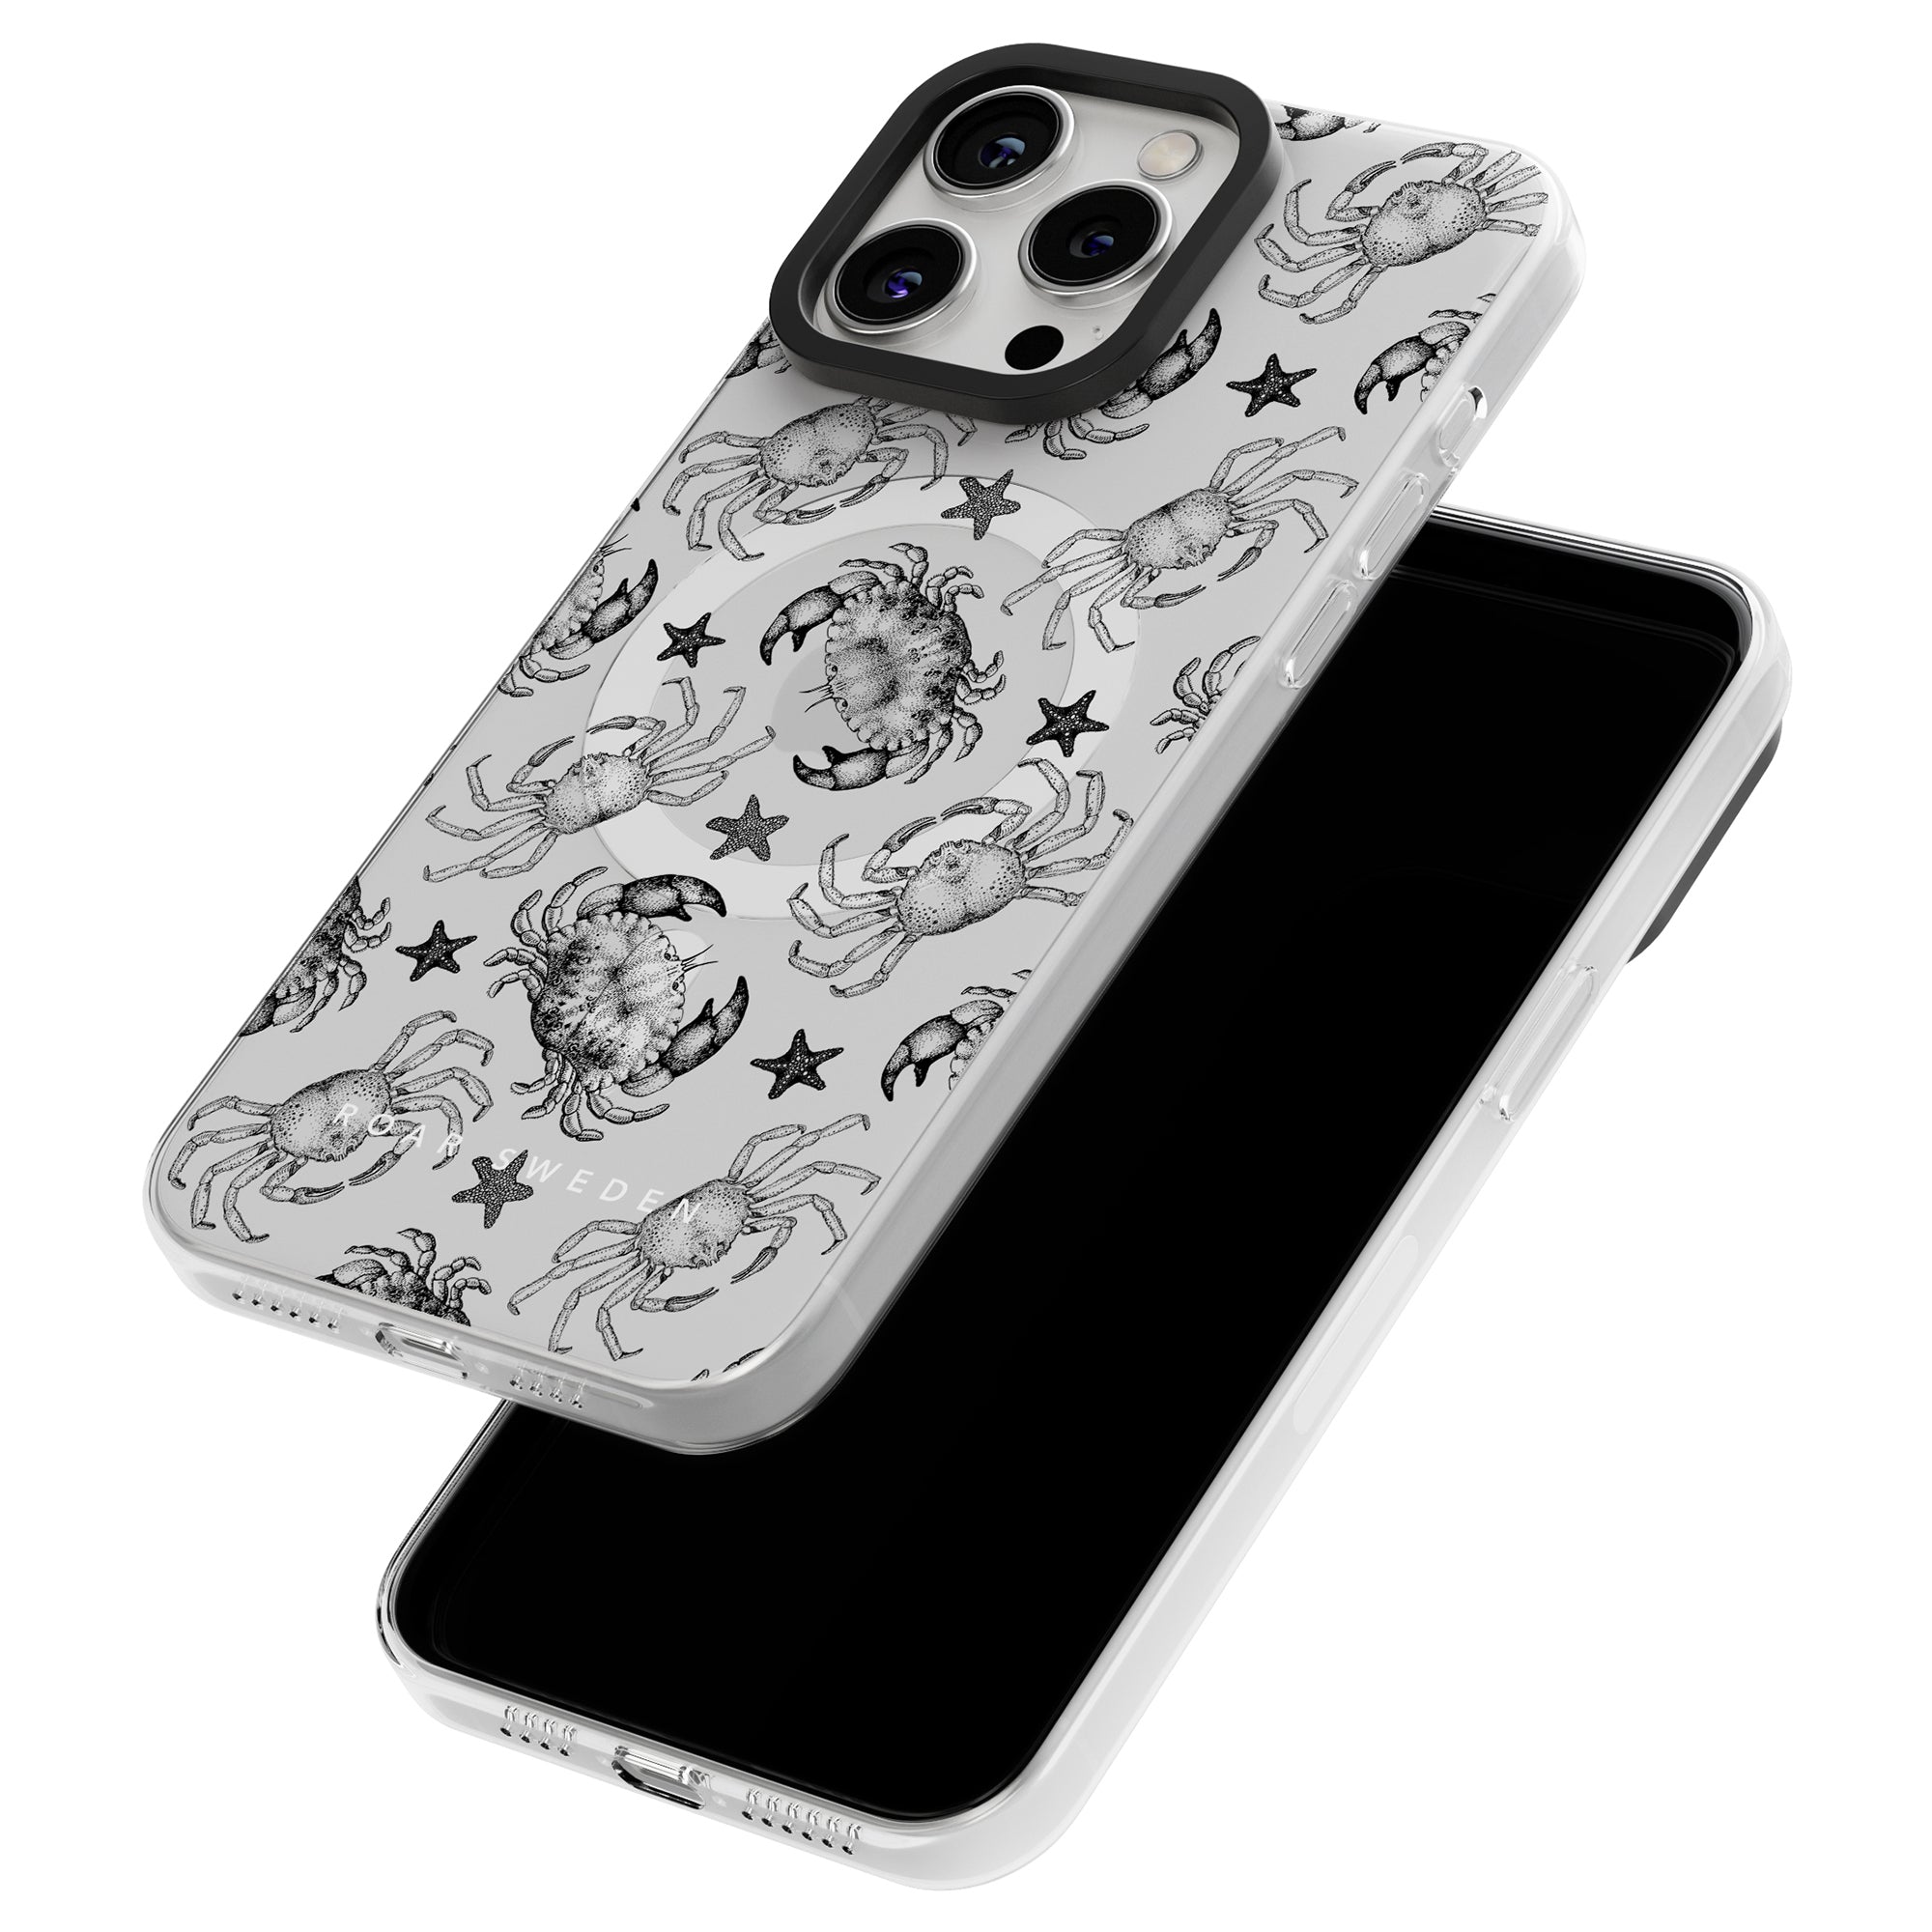 Two smartphones from the Ocean Collection are positioned, showcasing their crab and starfish patterned cases. One phone displays its vibrant screen, while the other highlights the intricate design of the Black Crab - MagSafe.